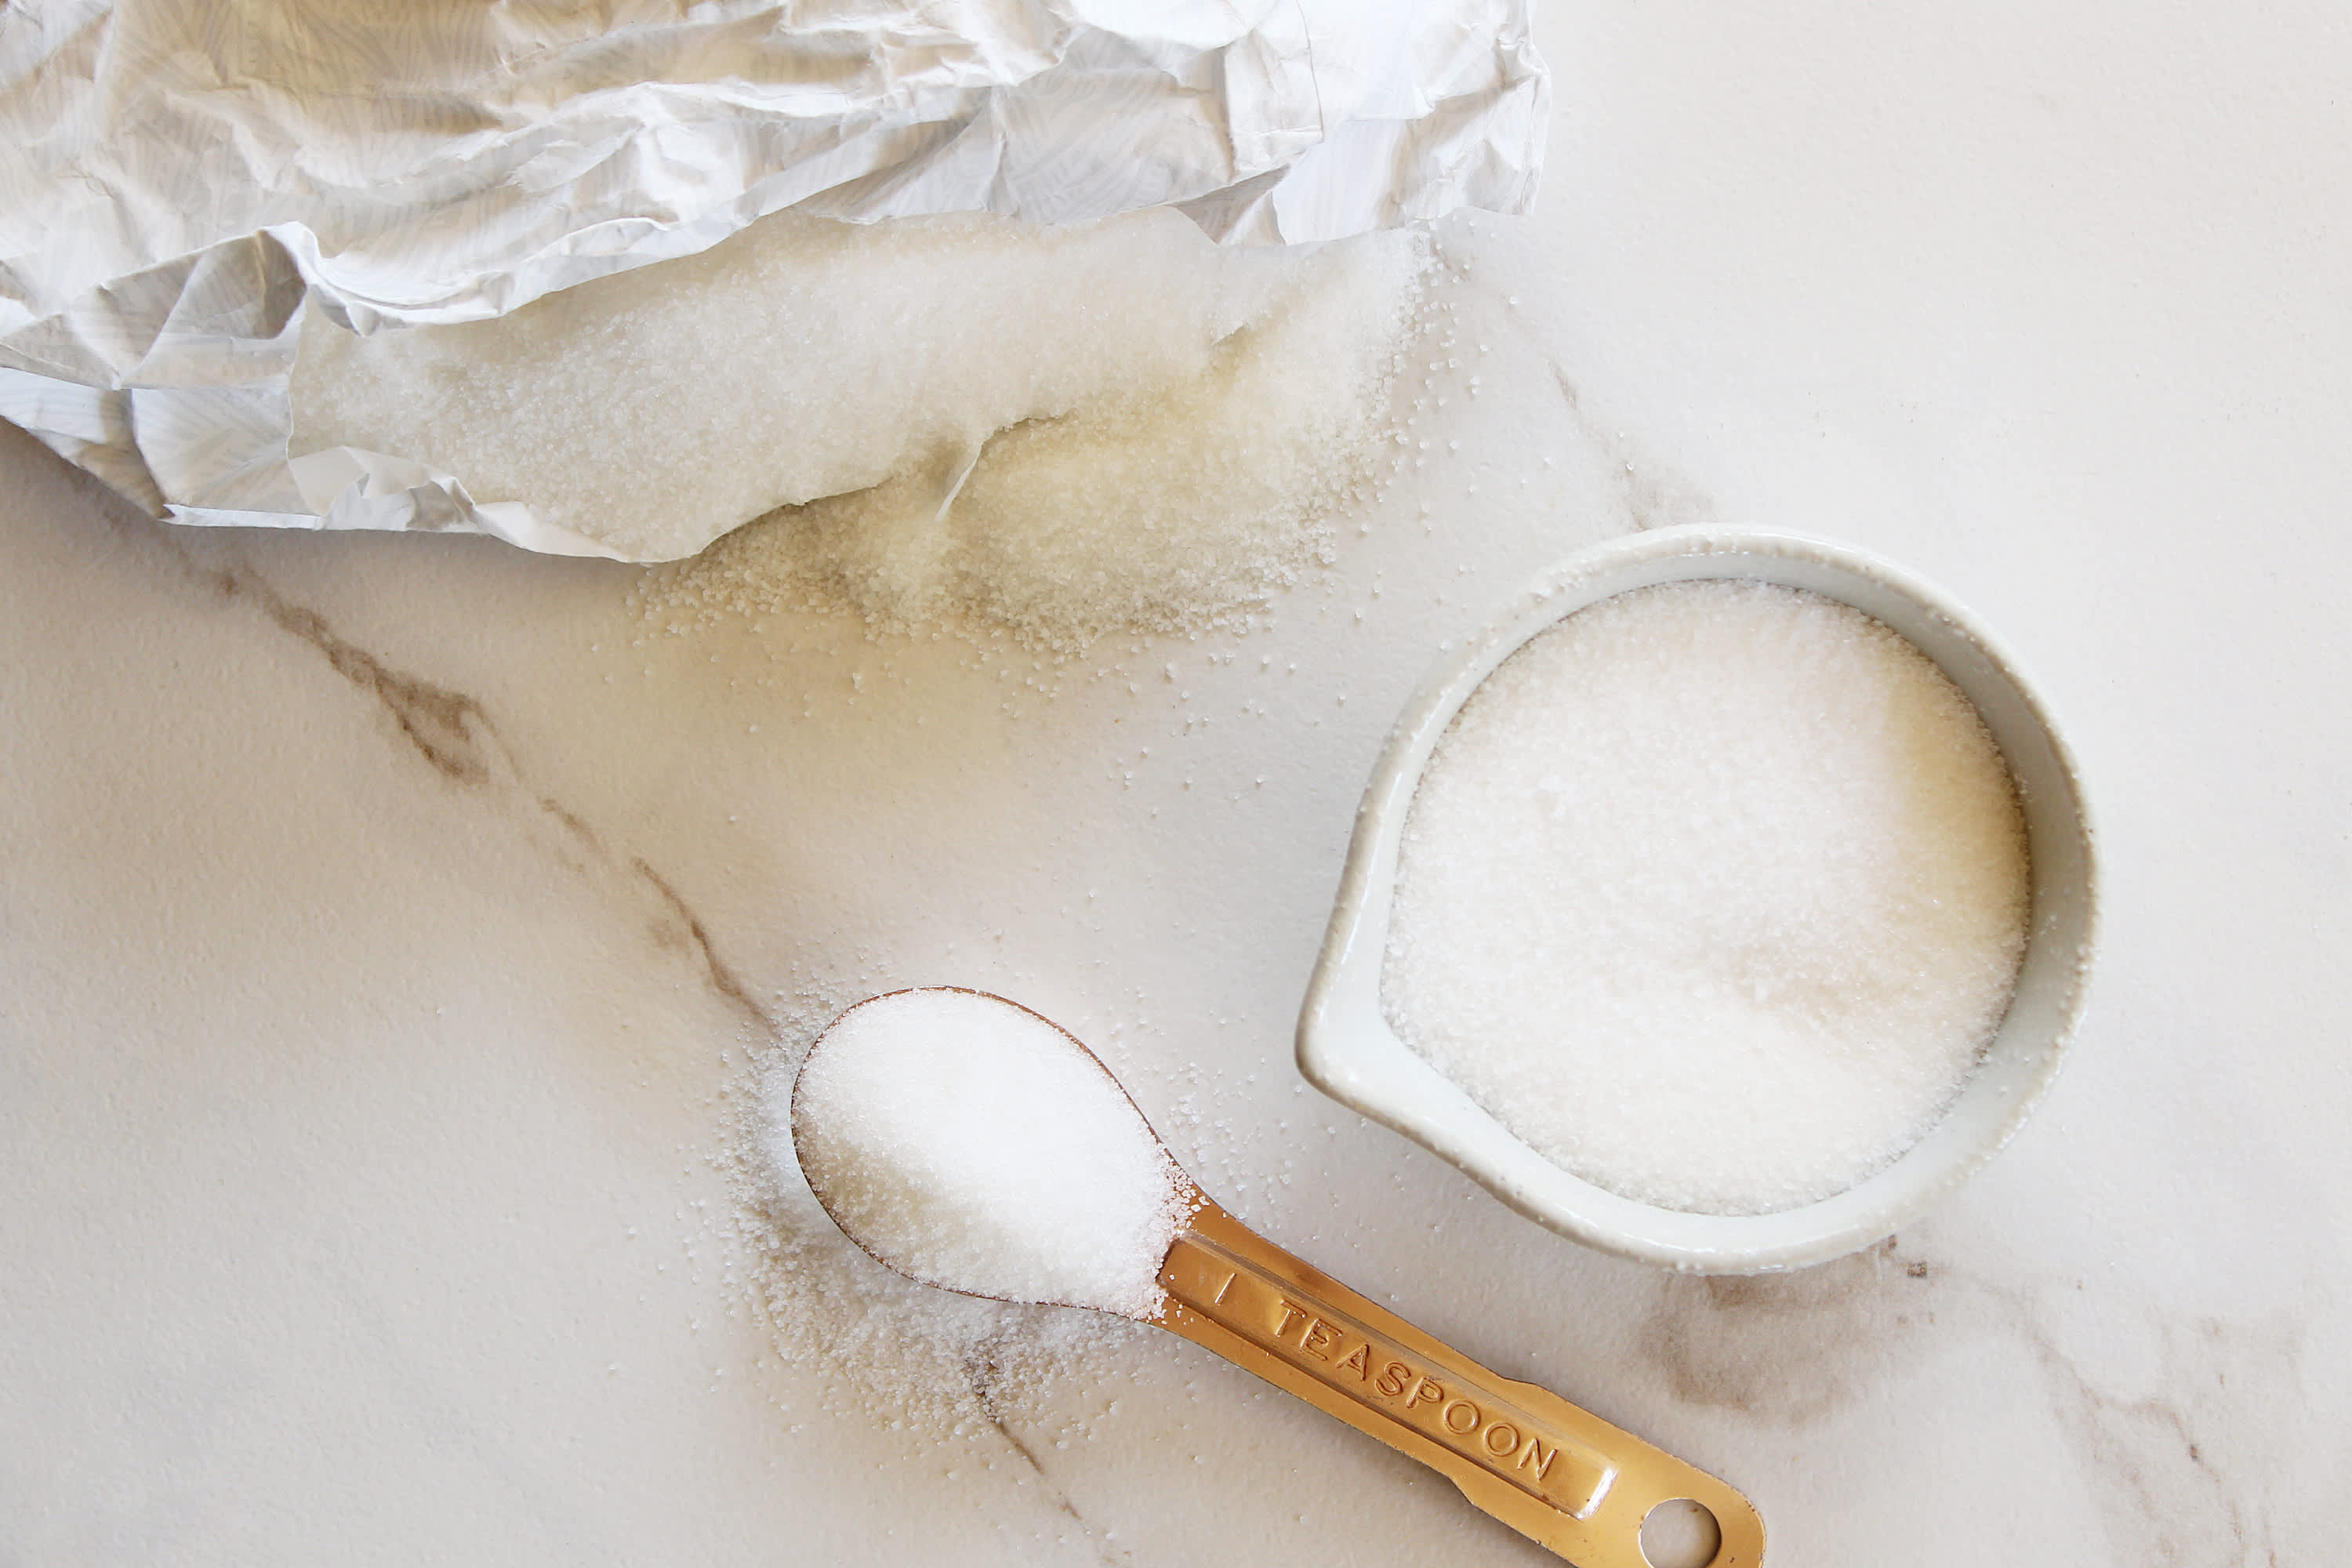 22 Benefits and Uses of Baking Soda